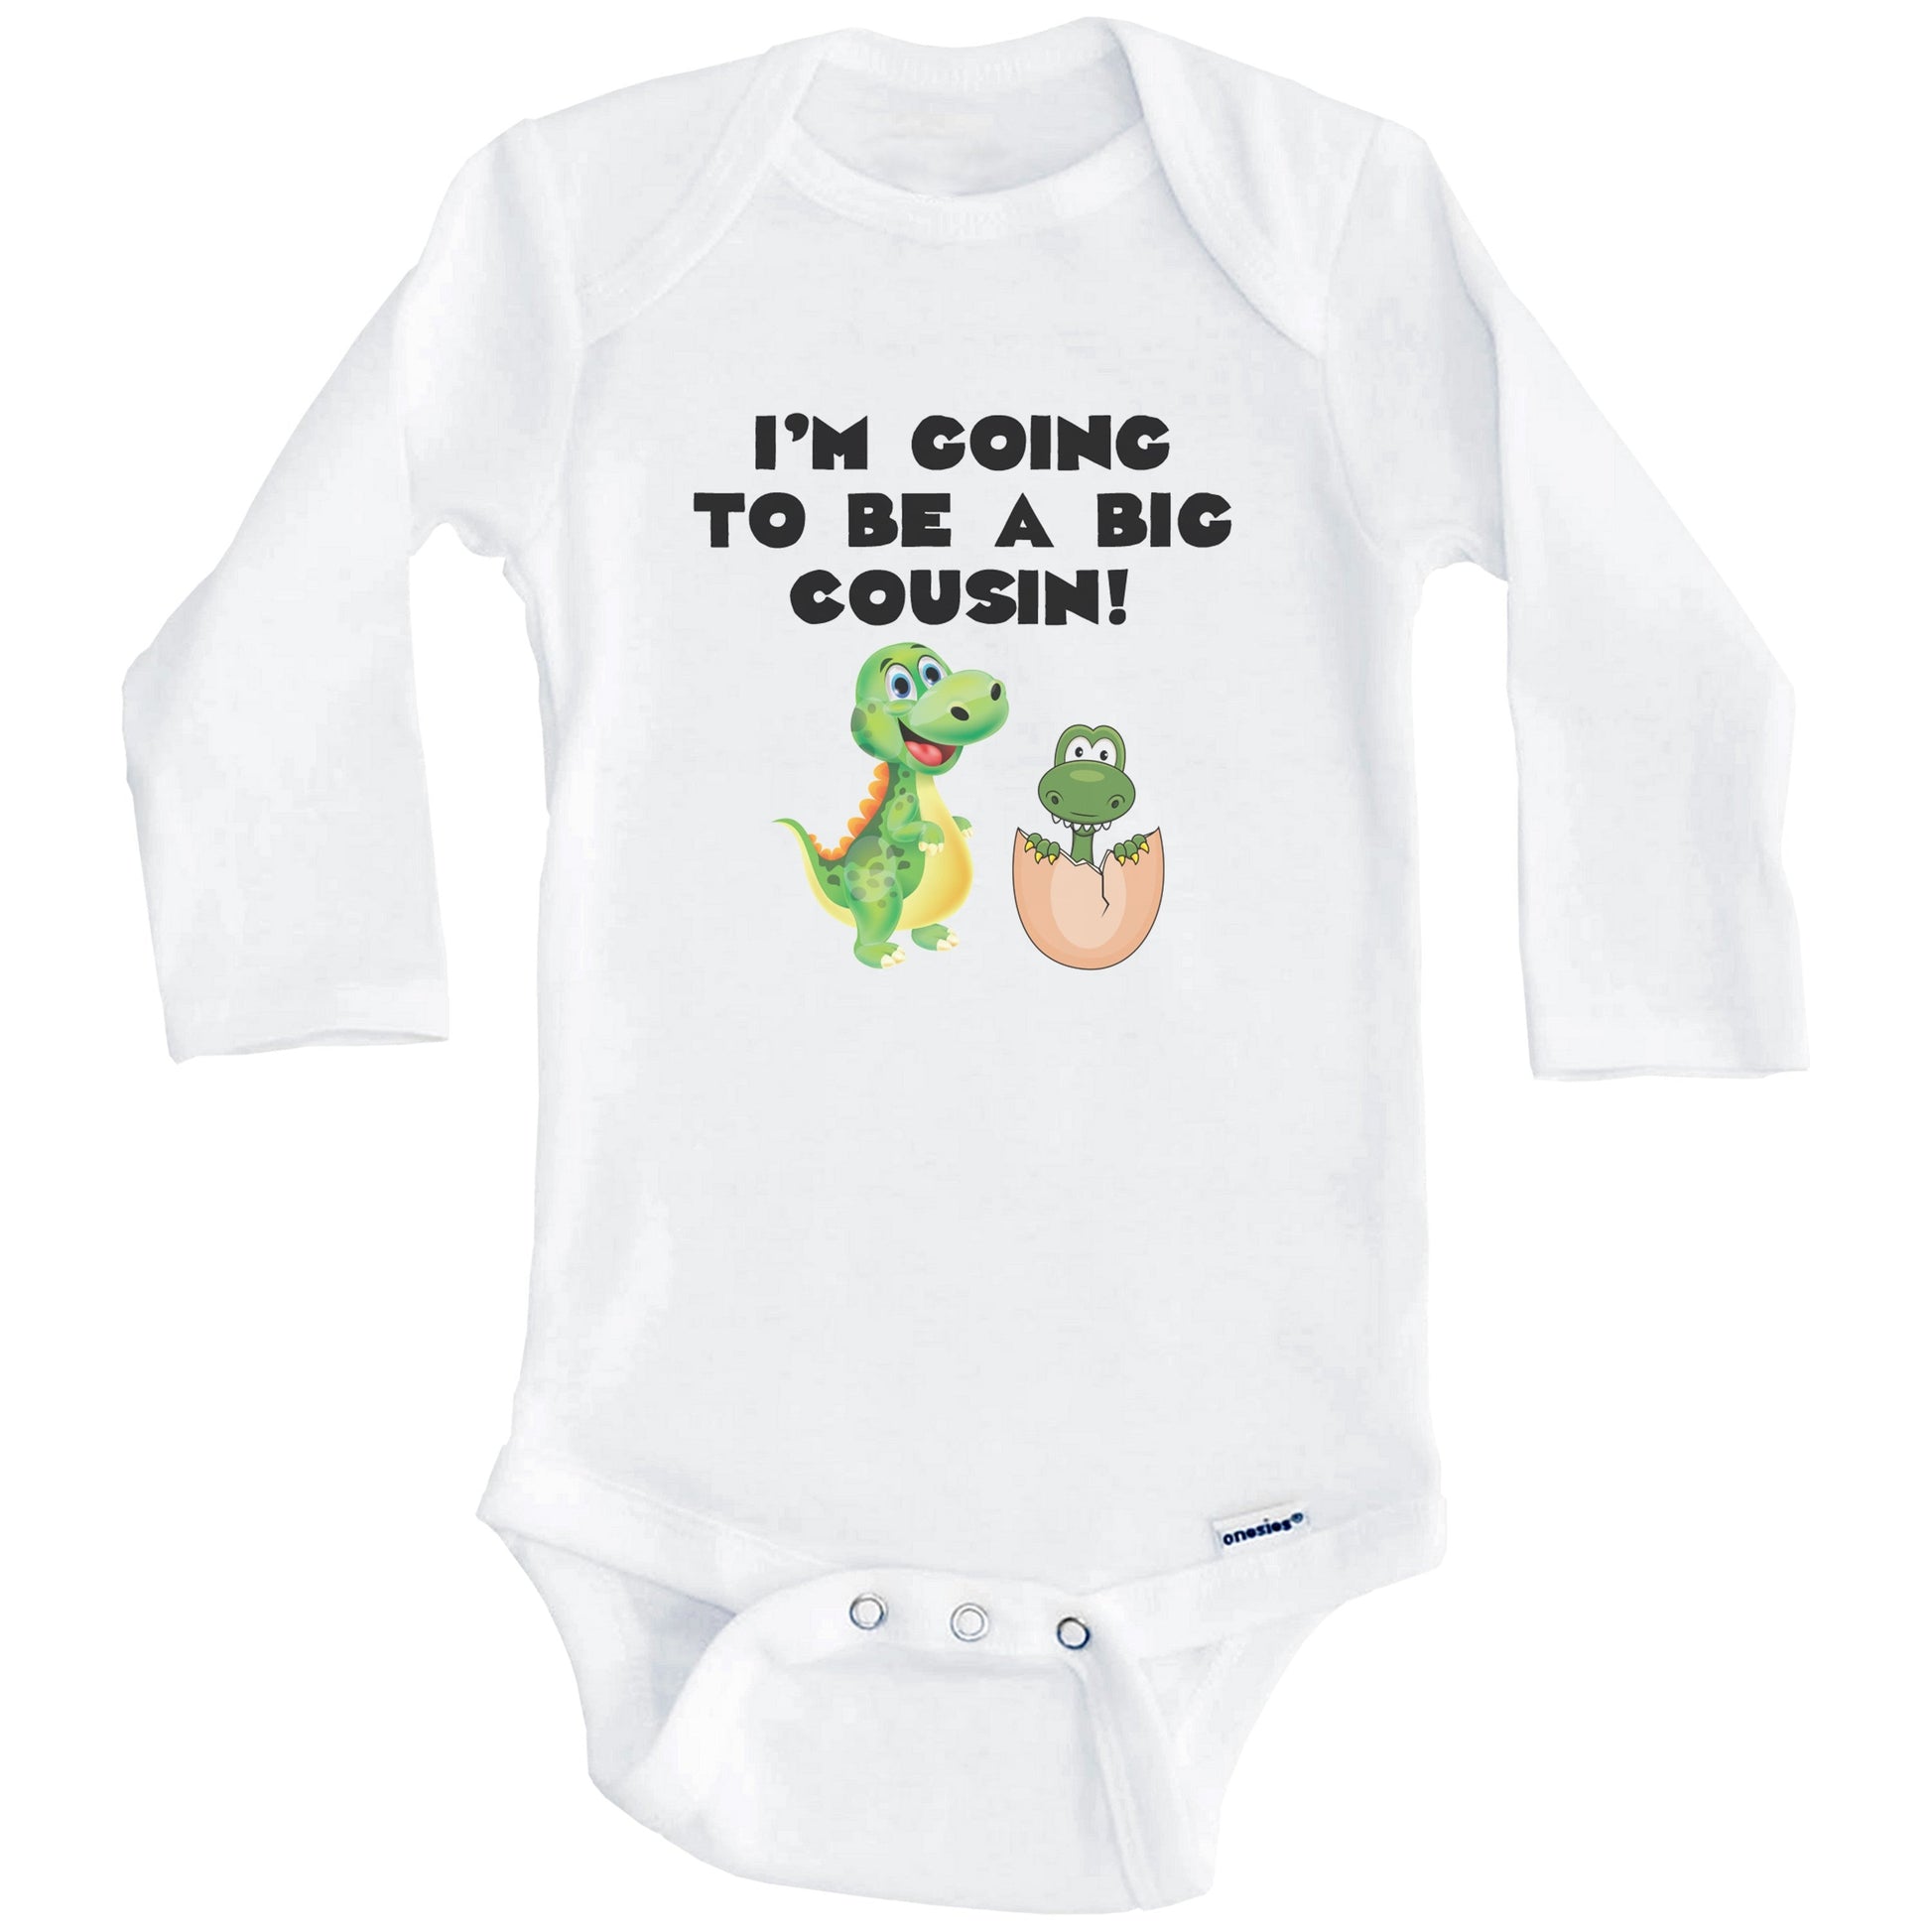 I'm Going To Be A Big Cousin Dinosaur Onesie - New Baby Announcement Baby Bodysuit For Cousin (Long Sleeves)